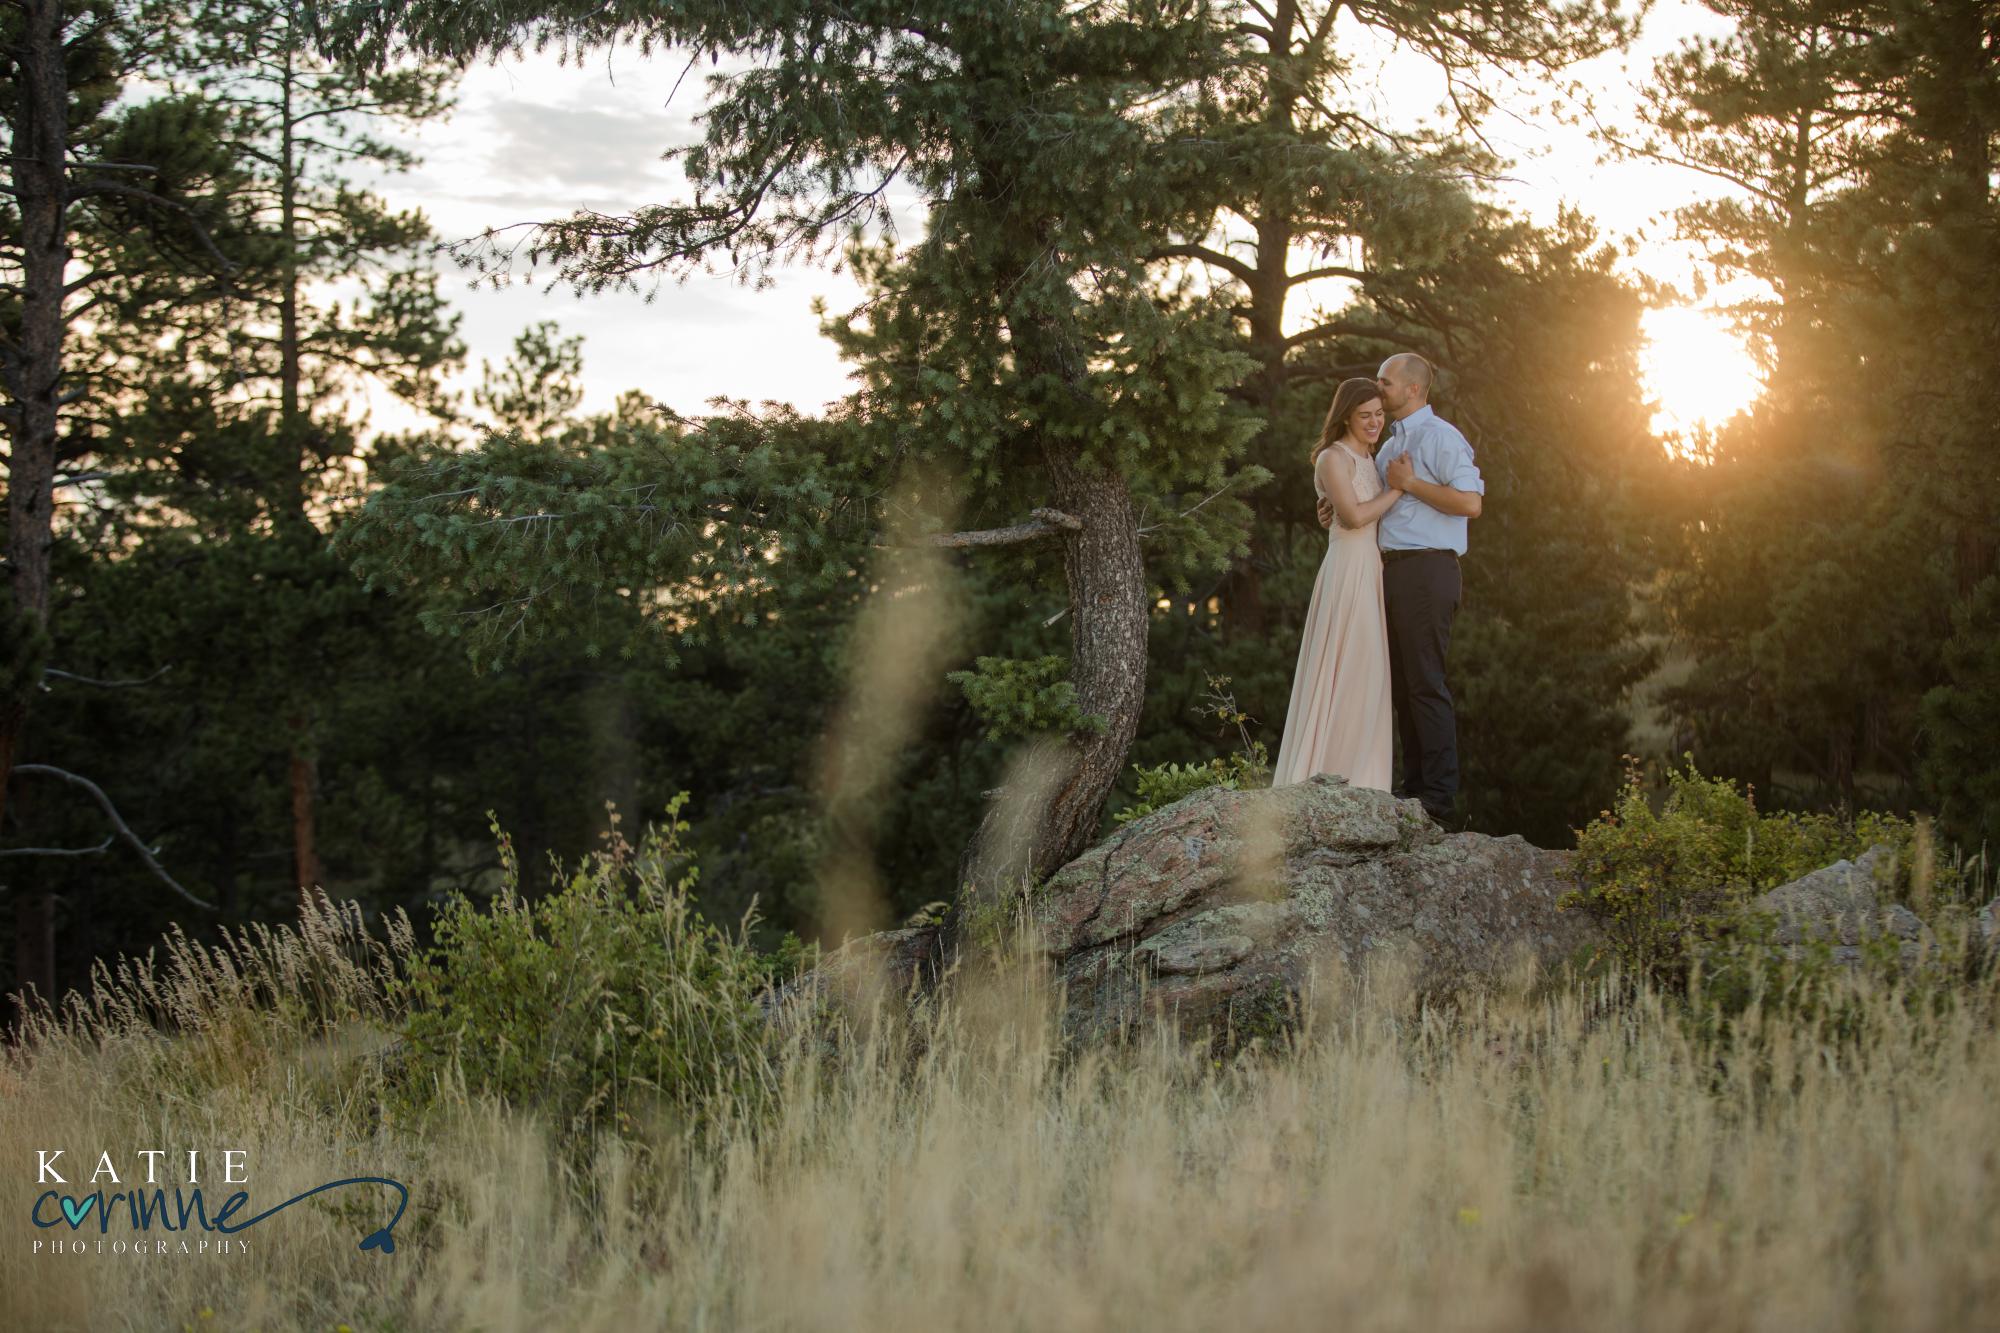 Newly engaged couple at Mount Falcon in Colorado